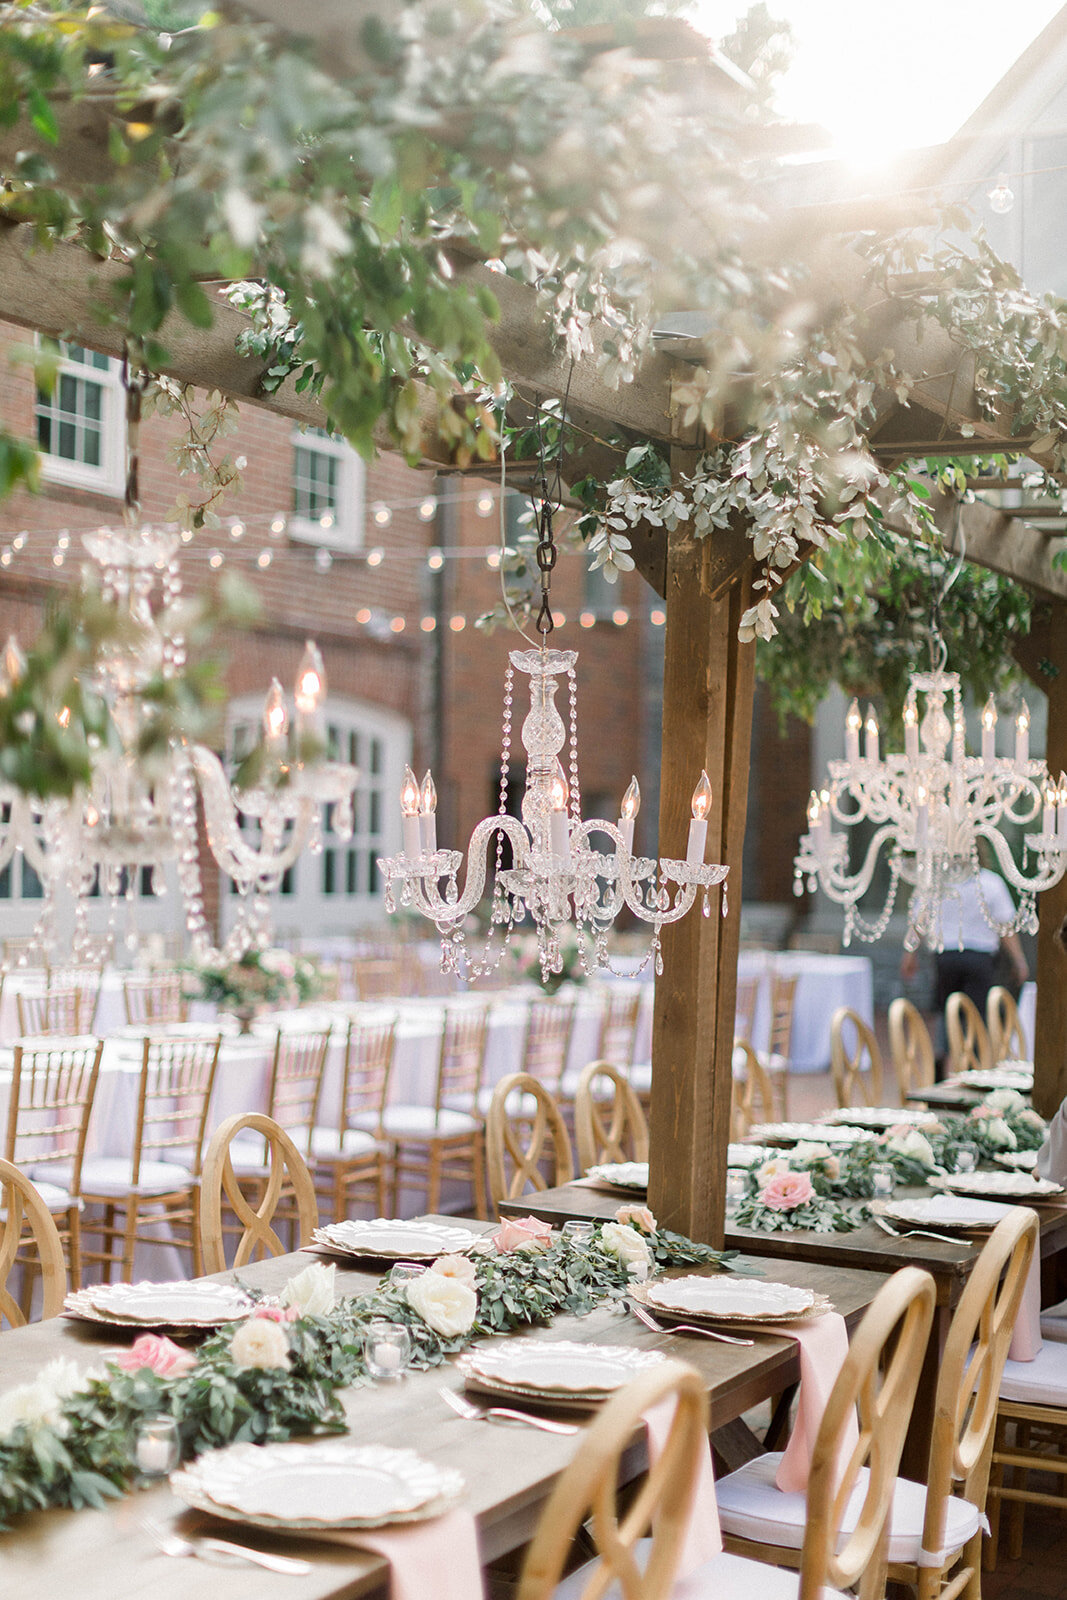 This garden courtyard reception pergola is covered with pink and ivory roses, majolica spray roses, heirloom carnations, assorted hydrangea and  cherry laurel. Designed by Rosemary & Finch in Nashville, TN.